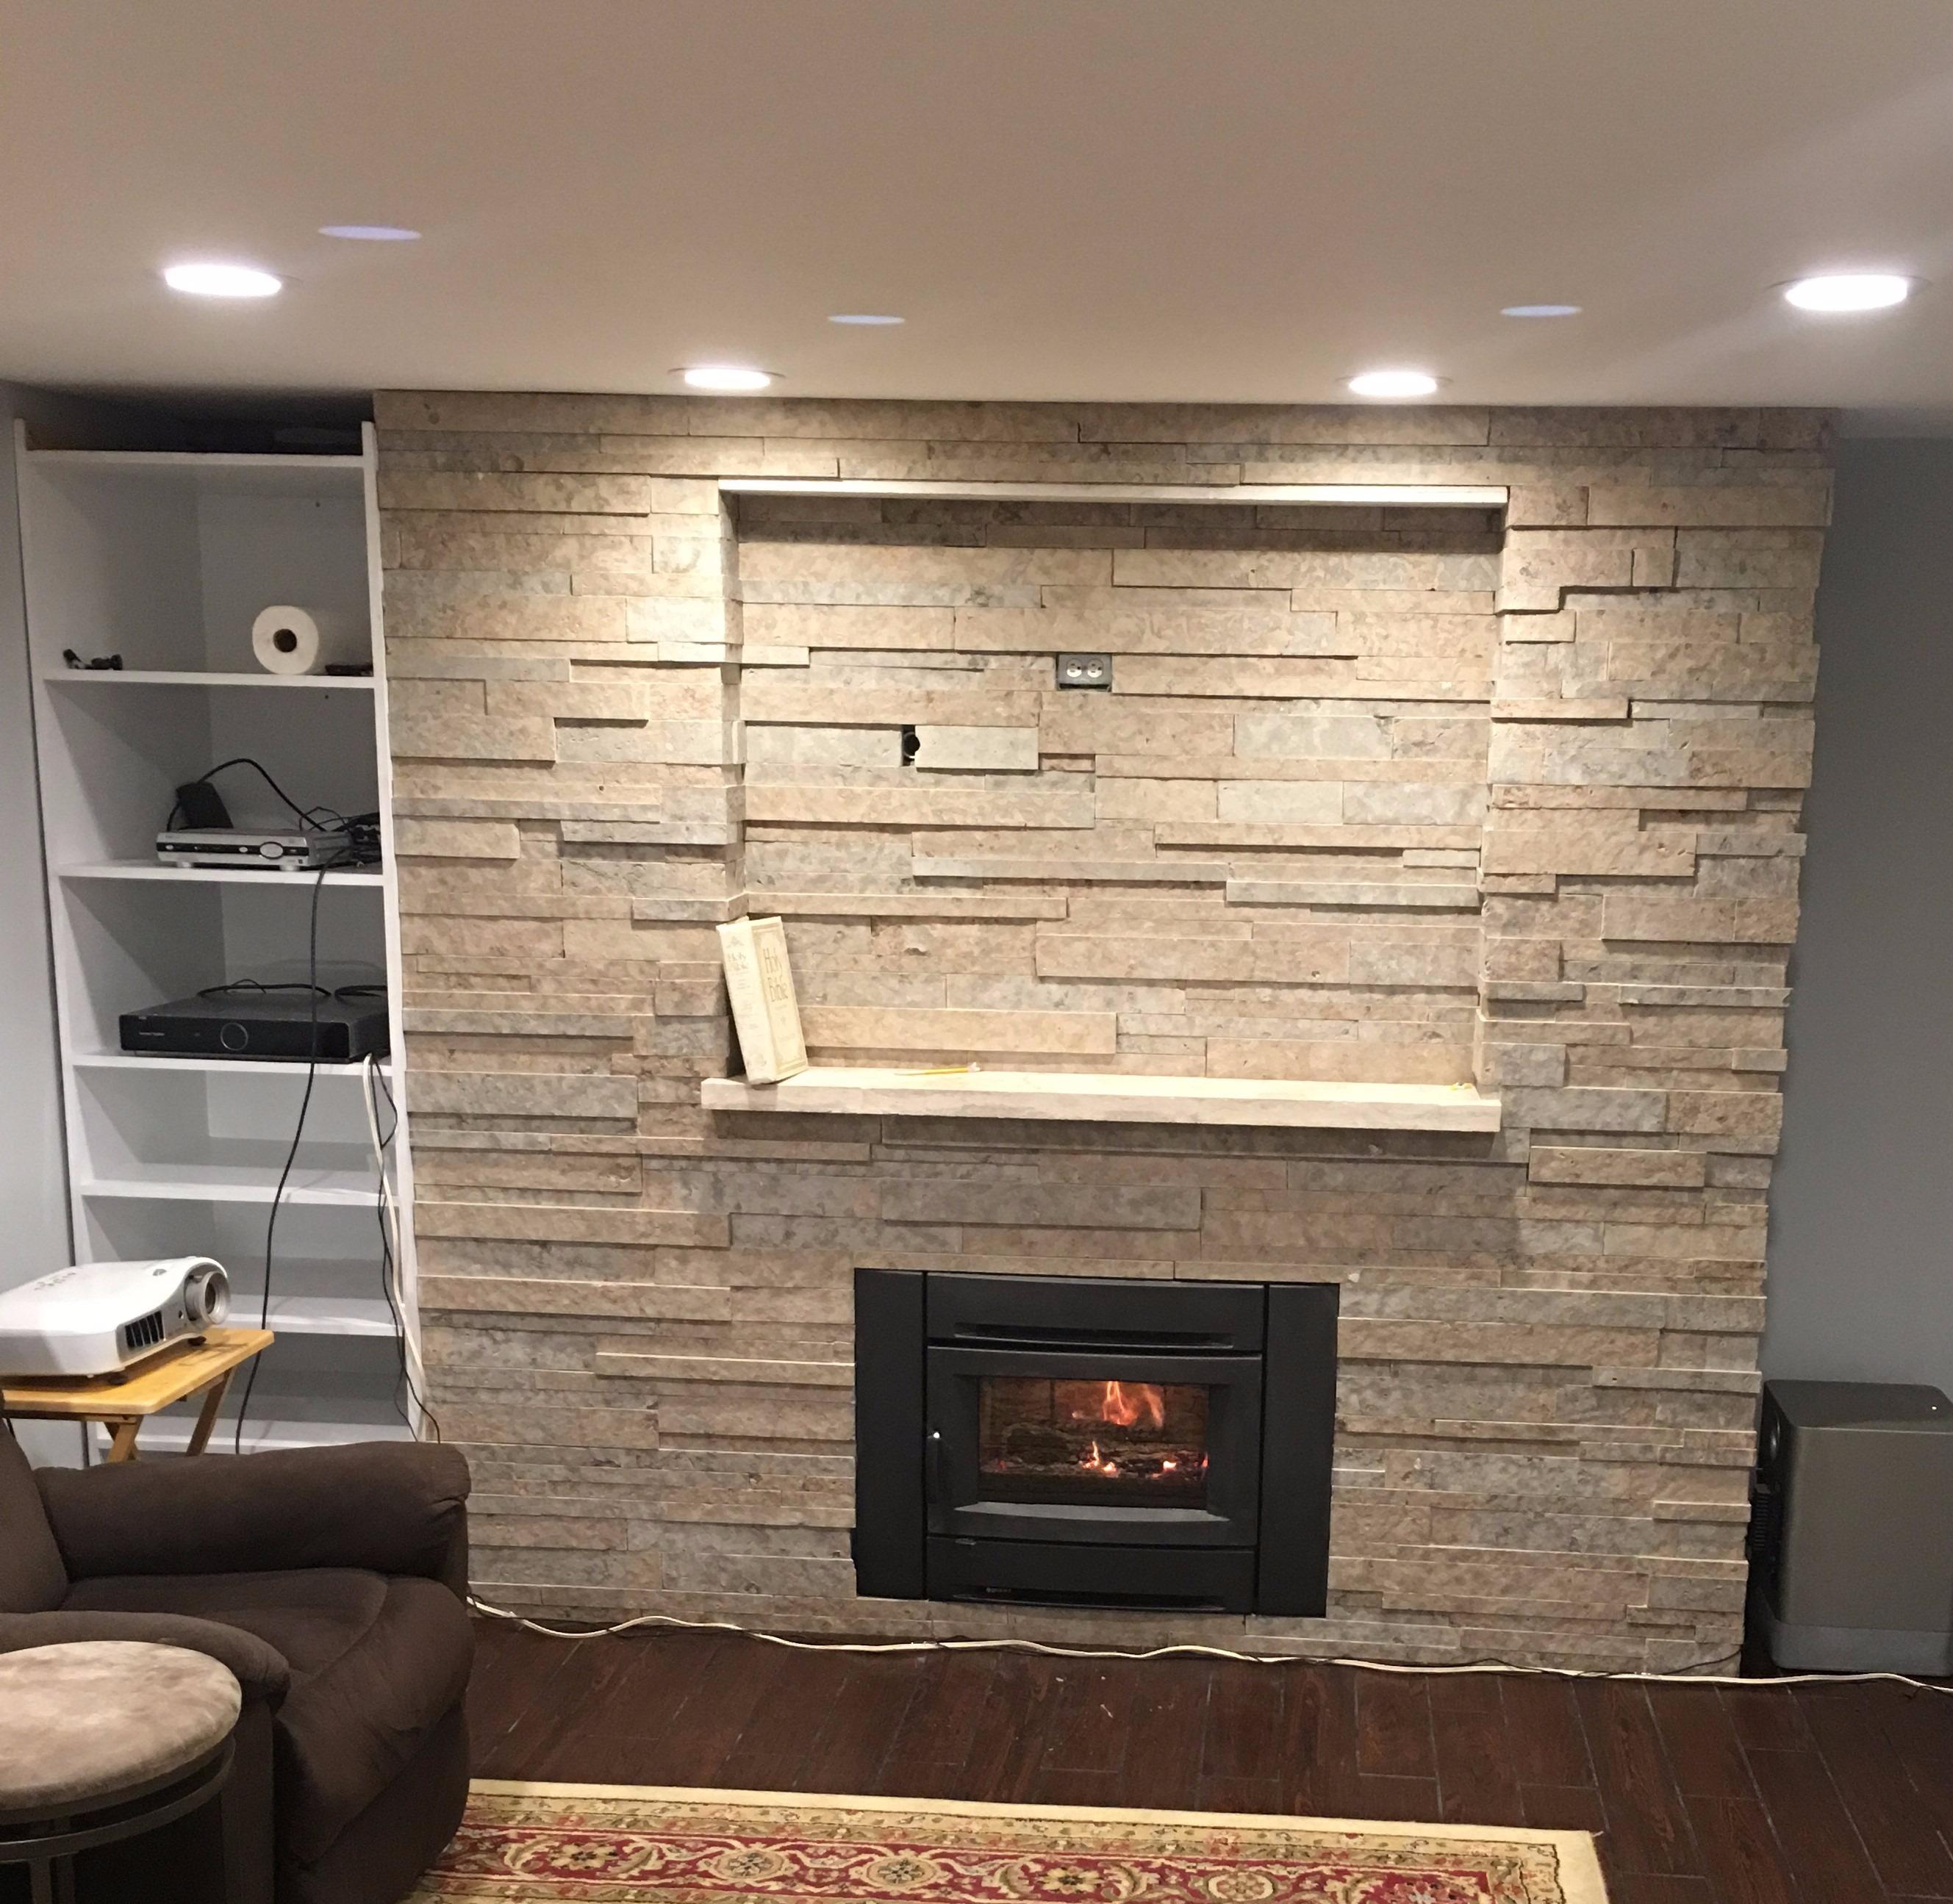 Interior stone work and fireplace.